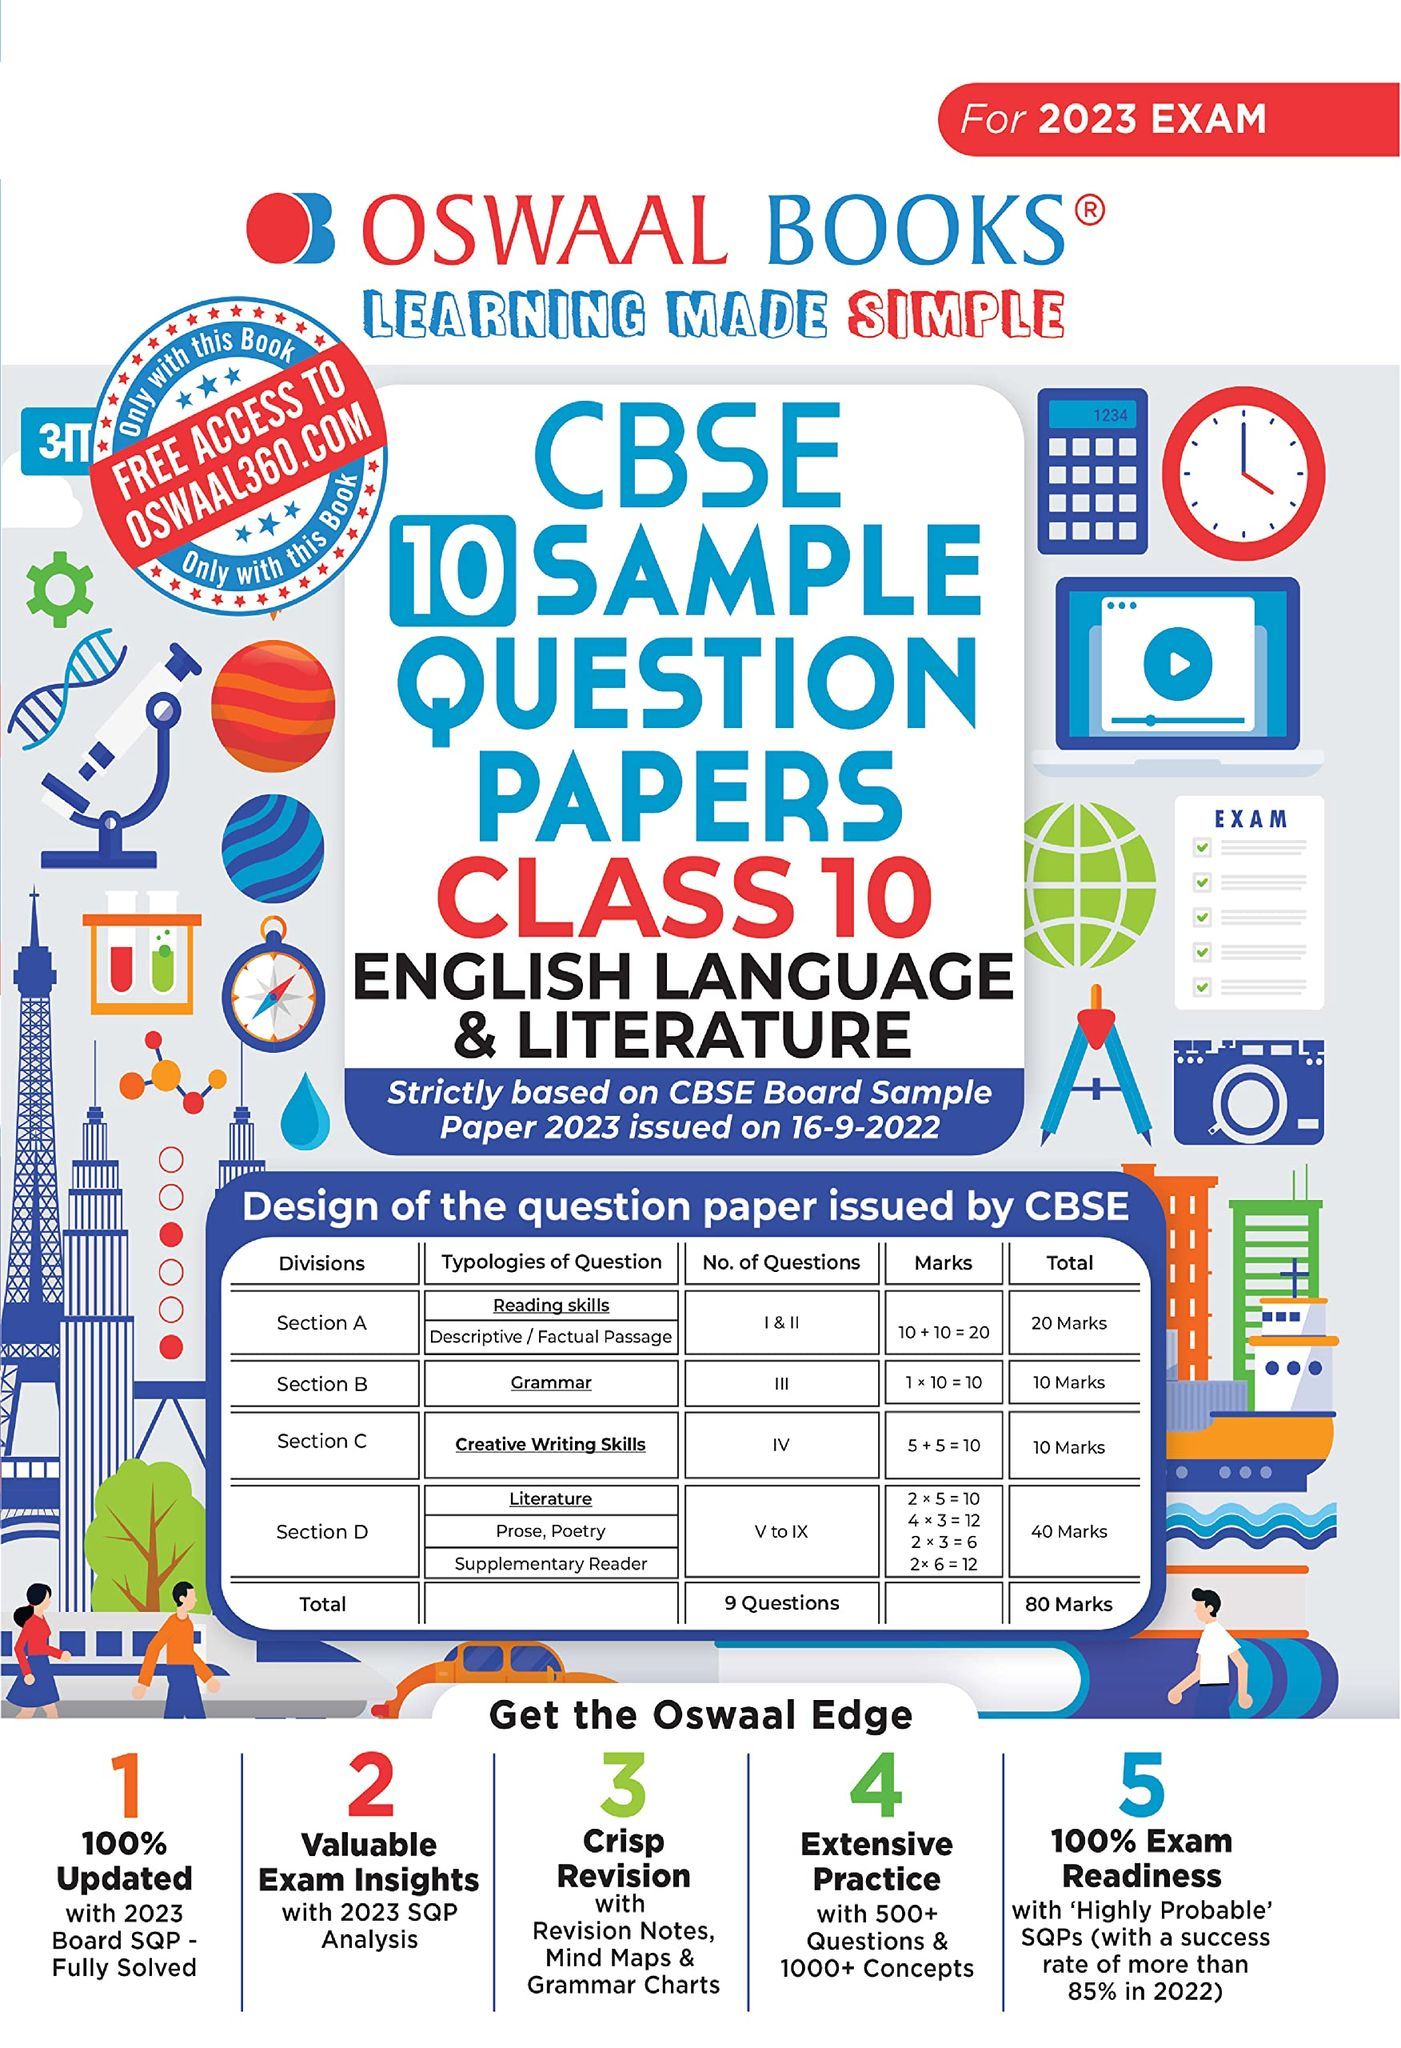 Oswaal CBSE Sample Question Papers Class 10 English Language & Literature Book for 2023 Board Exam (based on CBSE Sample Paper released on 16th September) [Paperback] Oswaal Editorial Board